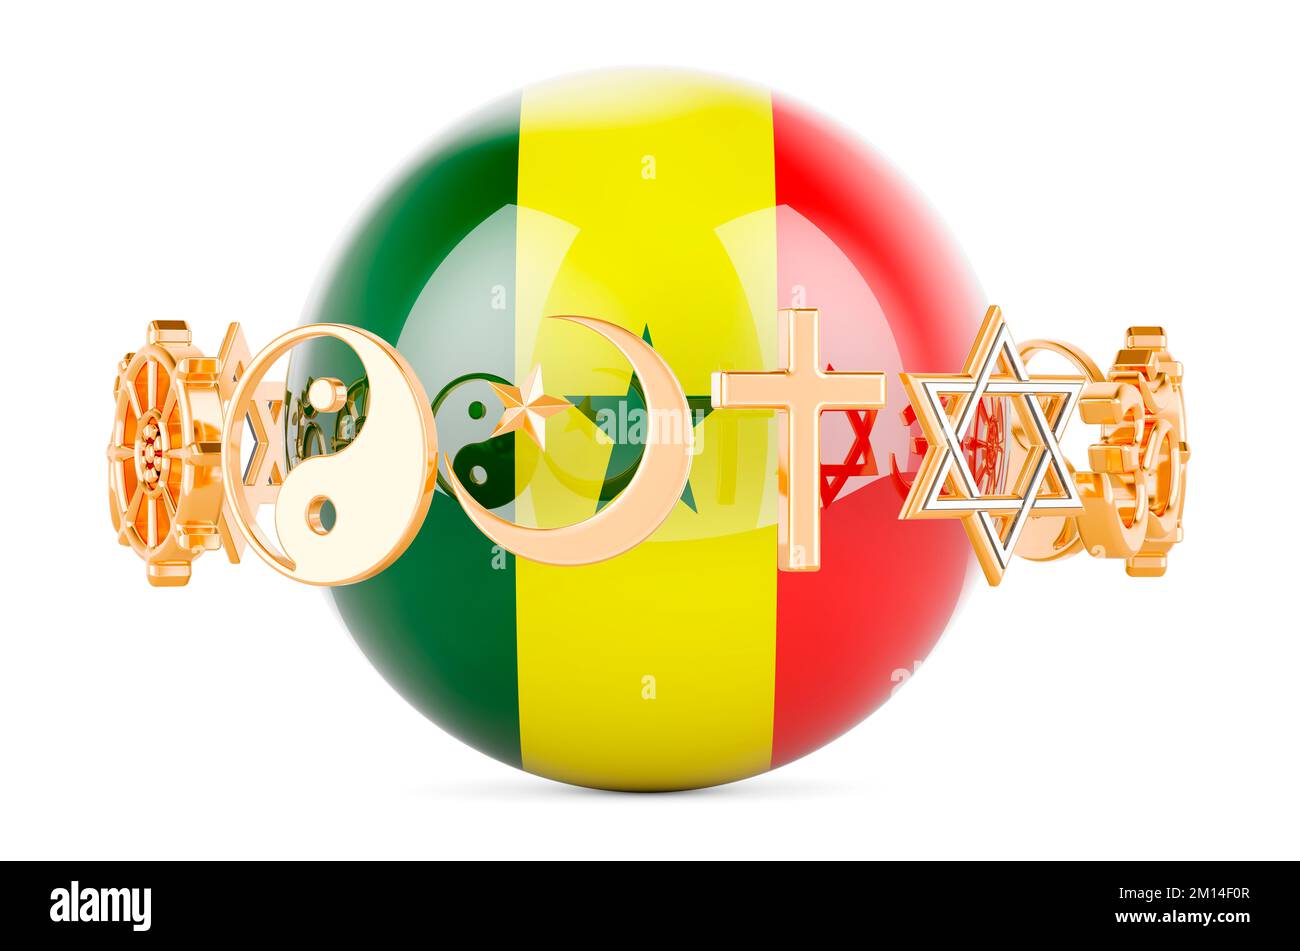 Senegalese flag painted on sphere with religions symbols around, 3D rendering isolated on white background Stock Photo